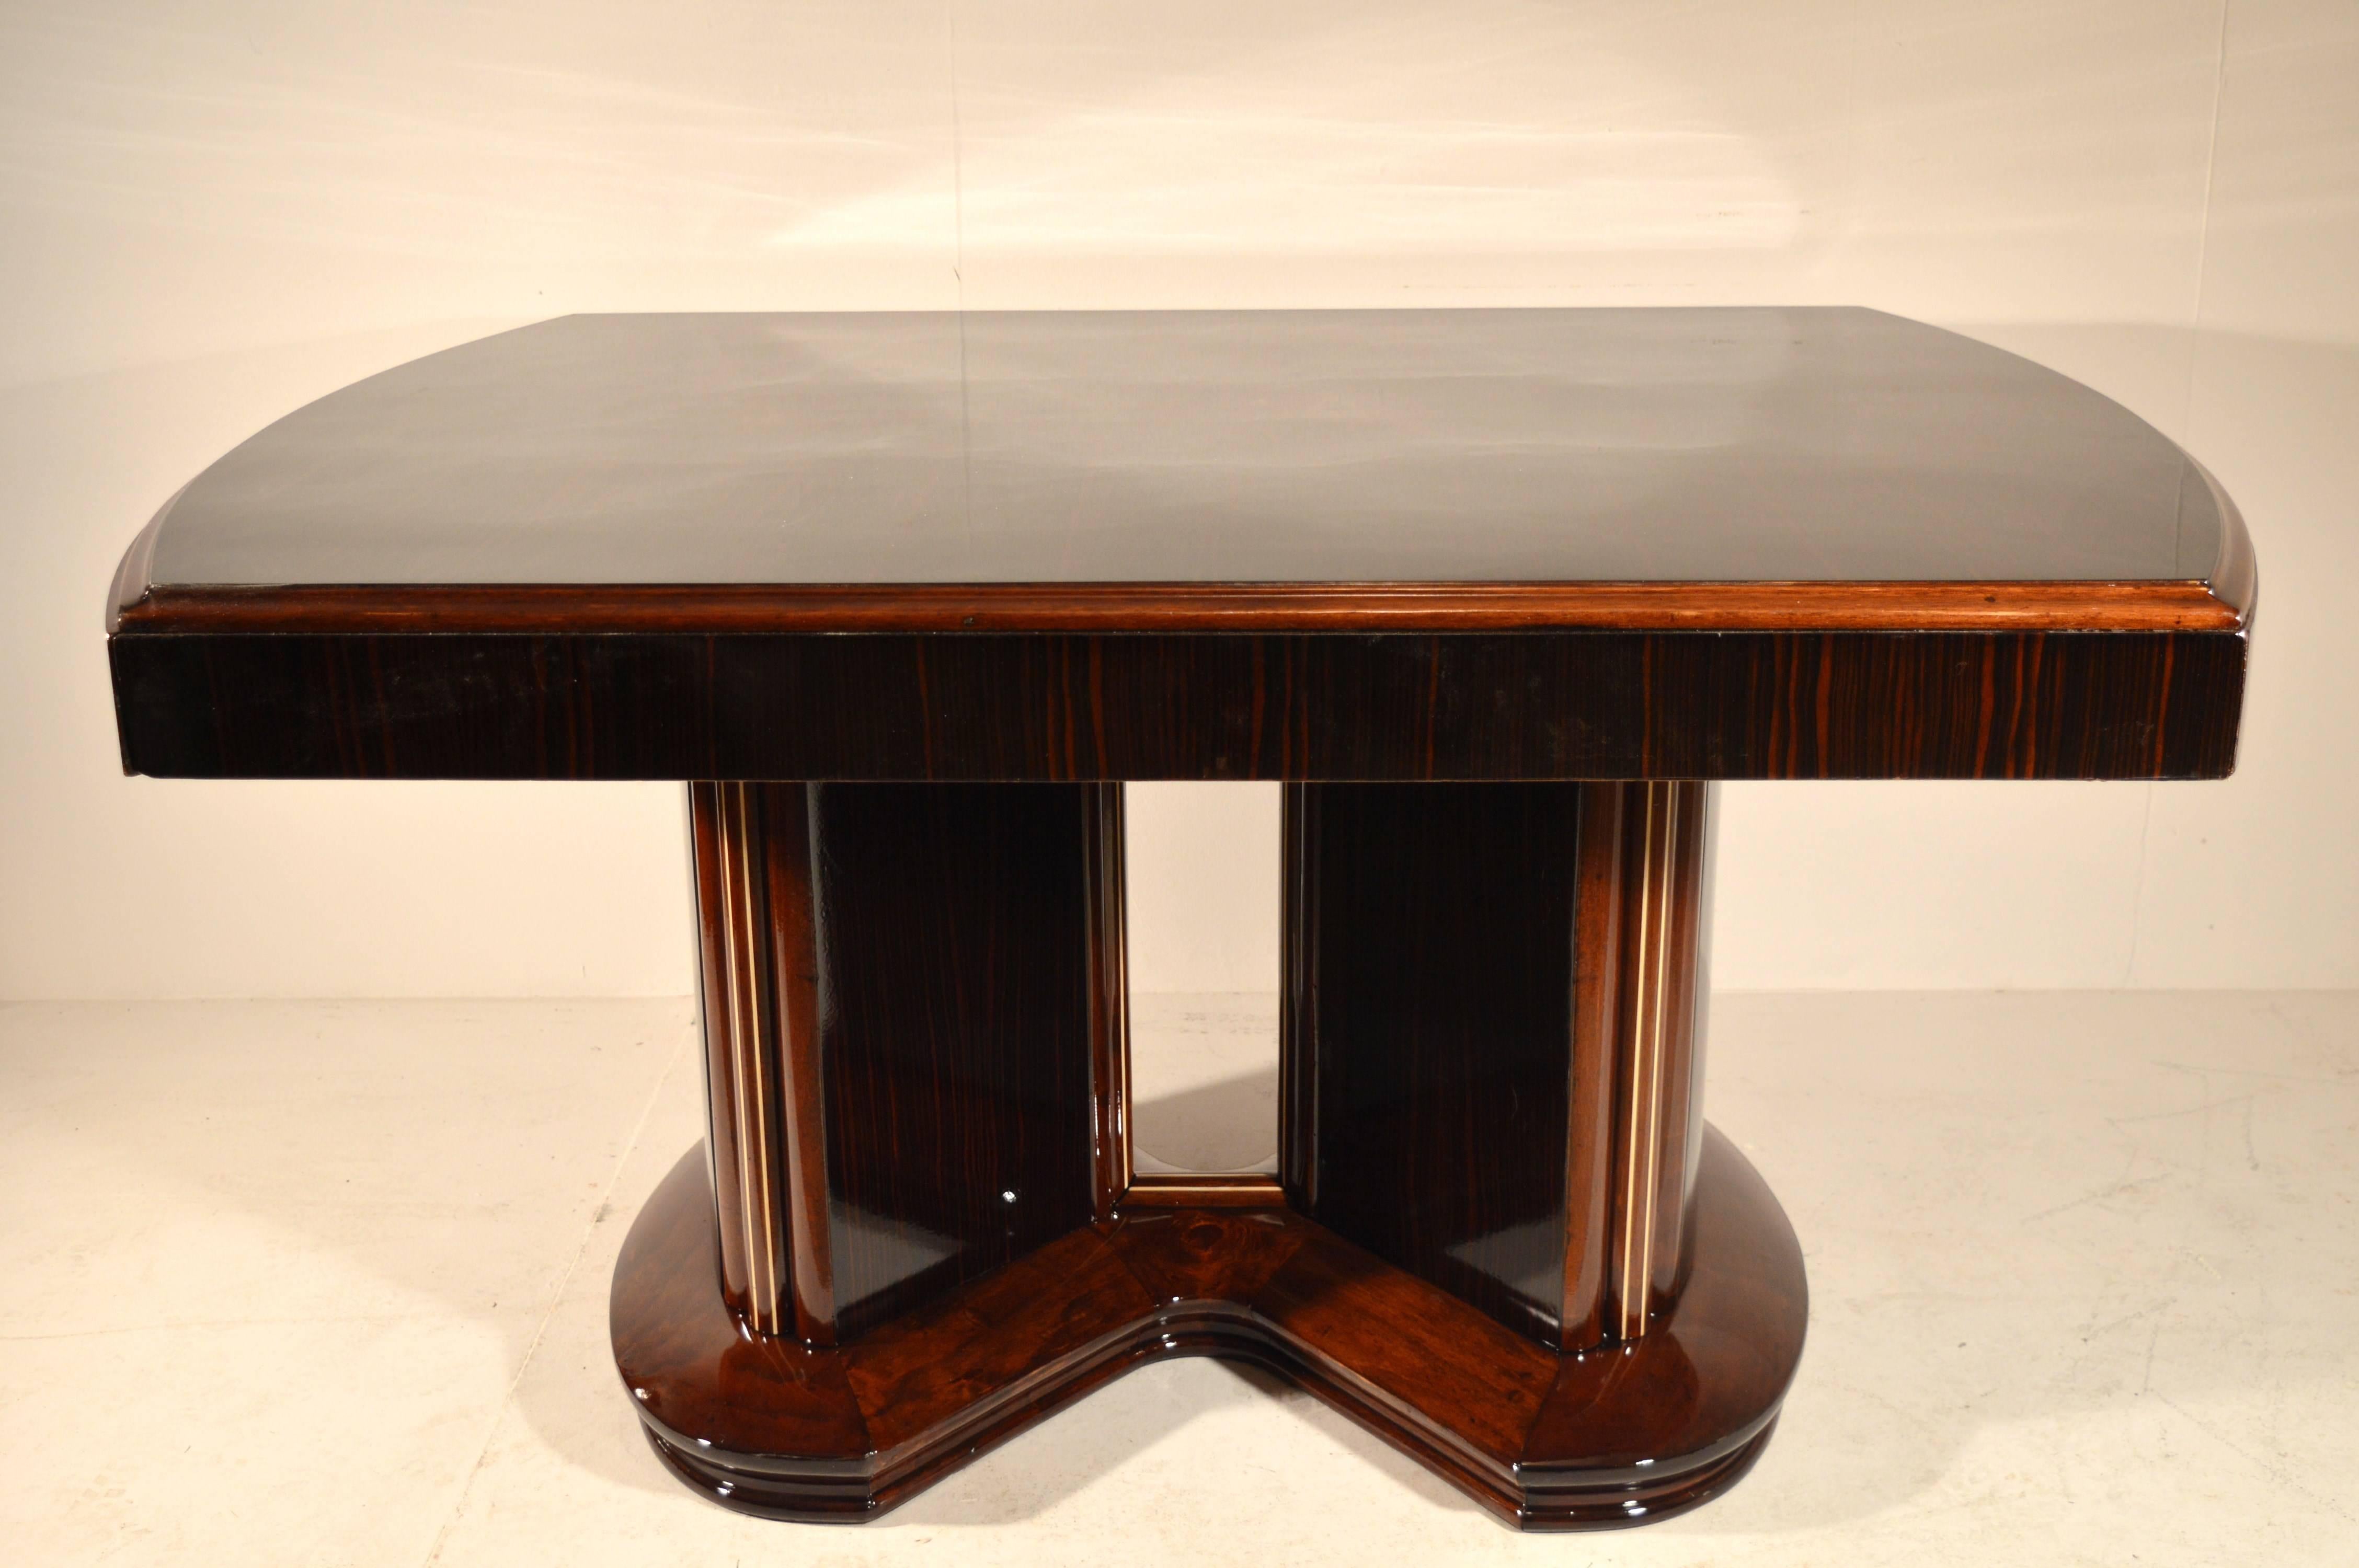 Mid-20th Century Art Deco Dining Table with Eight Chairs in Ebony Macassar